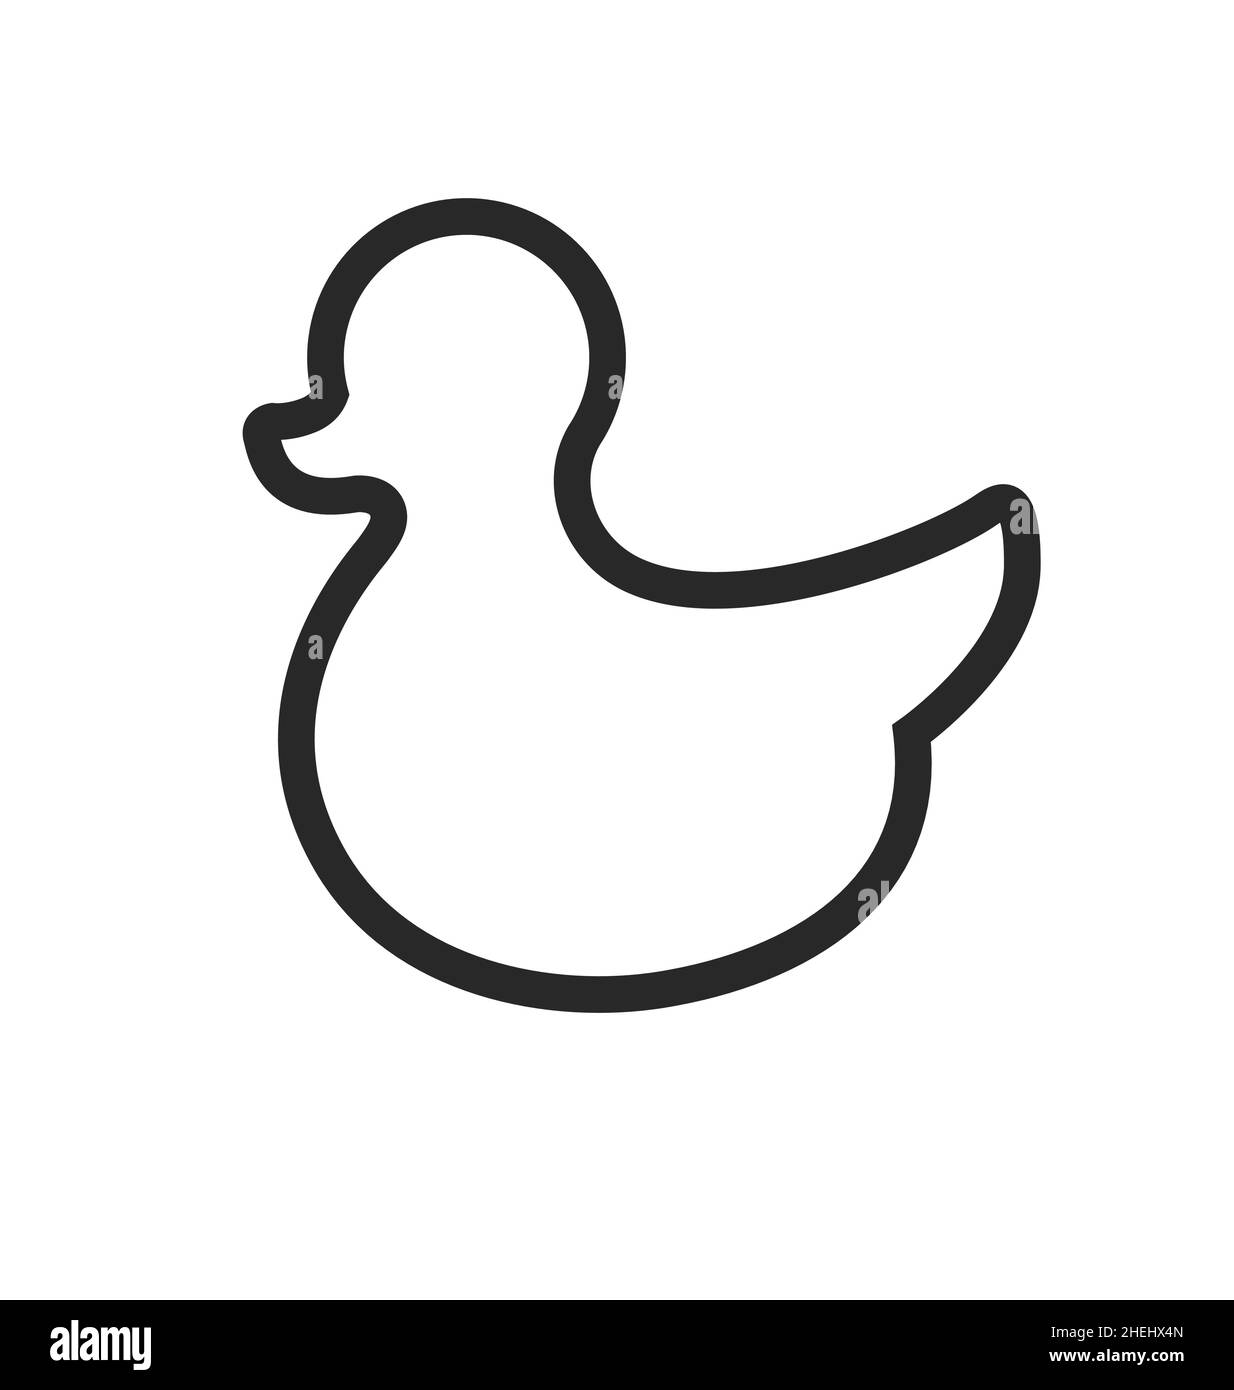 Duck outline Black and White Stock Photos & Images - Alamy